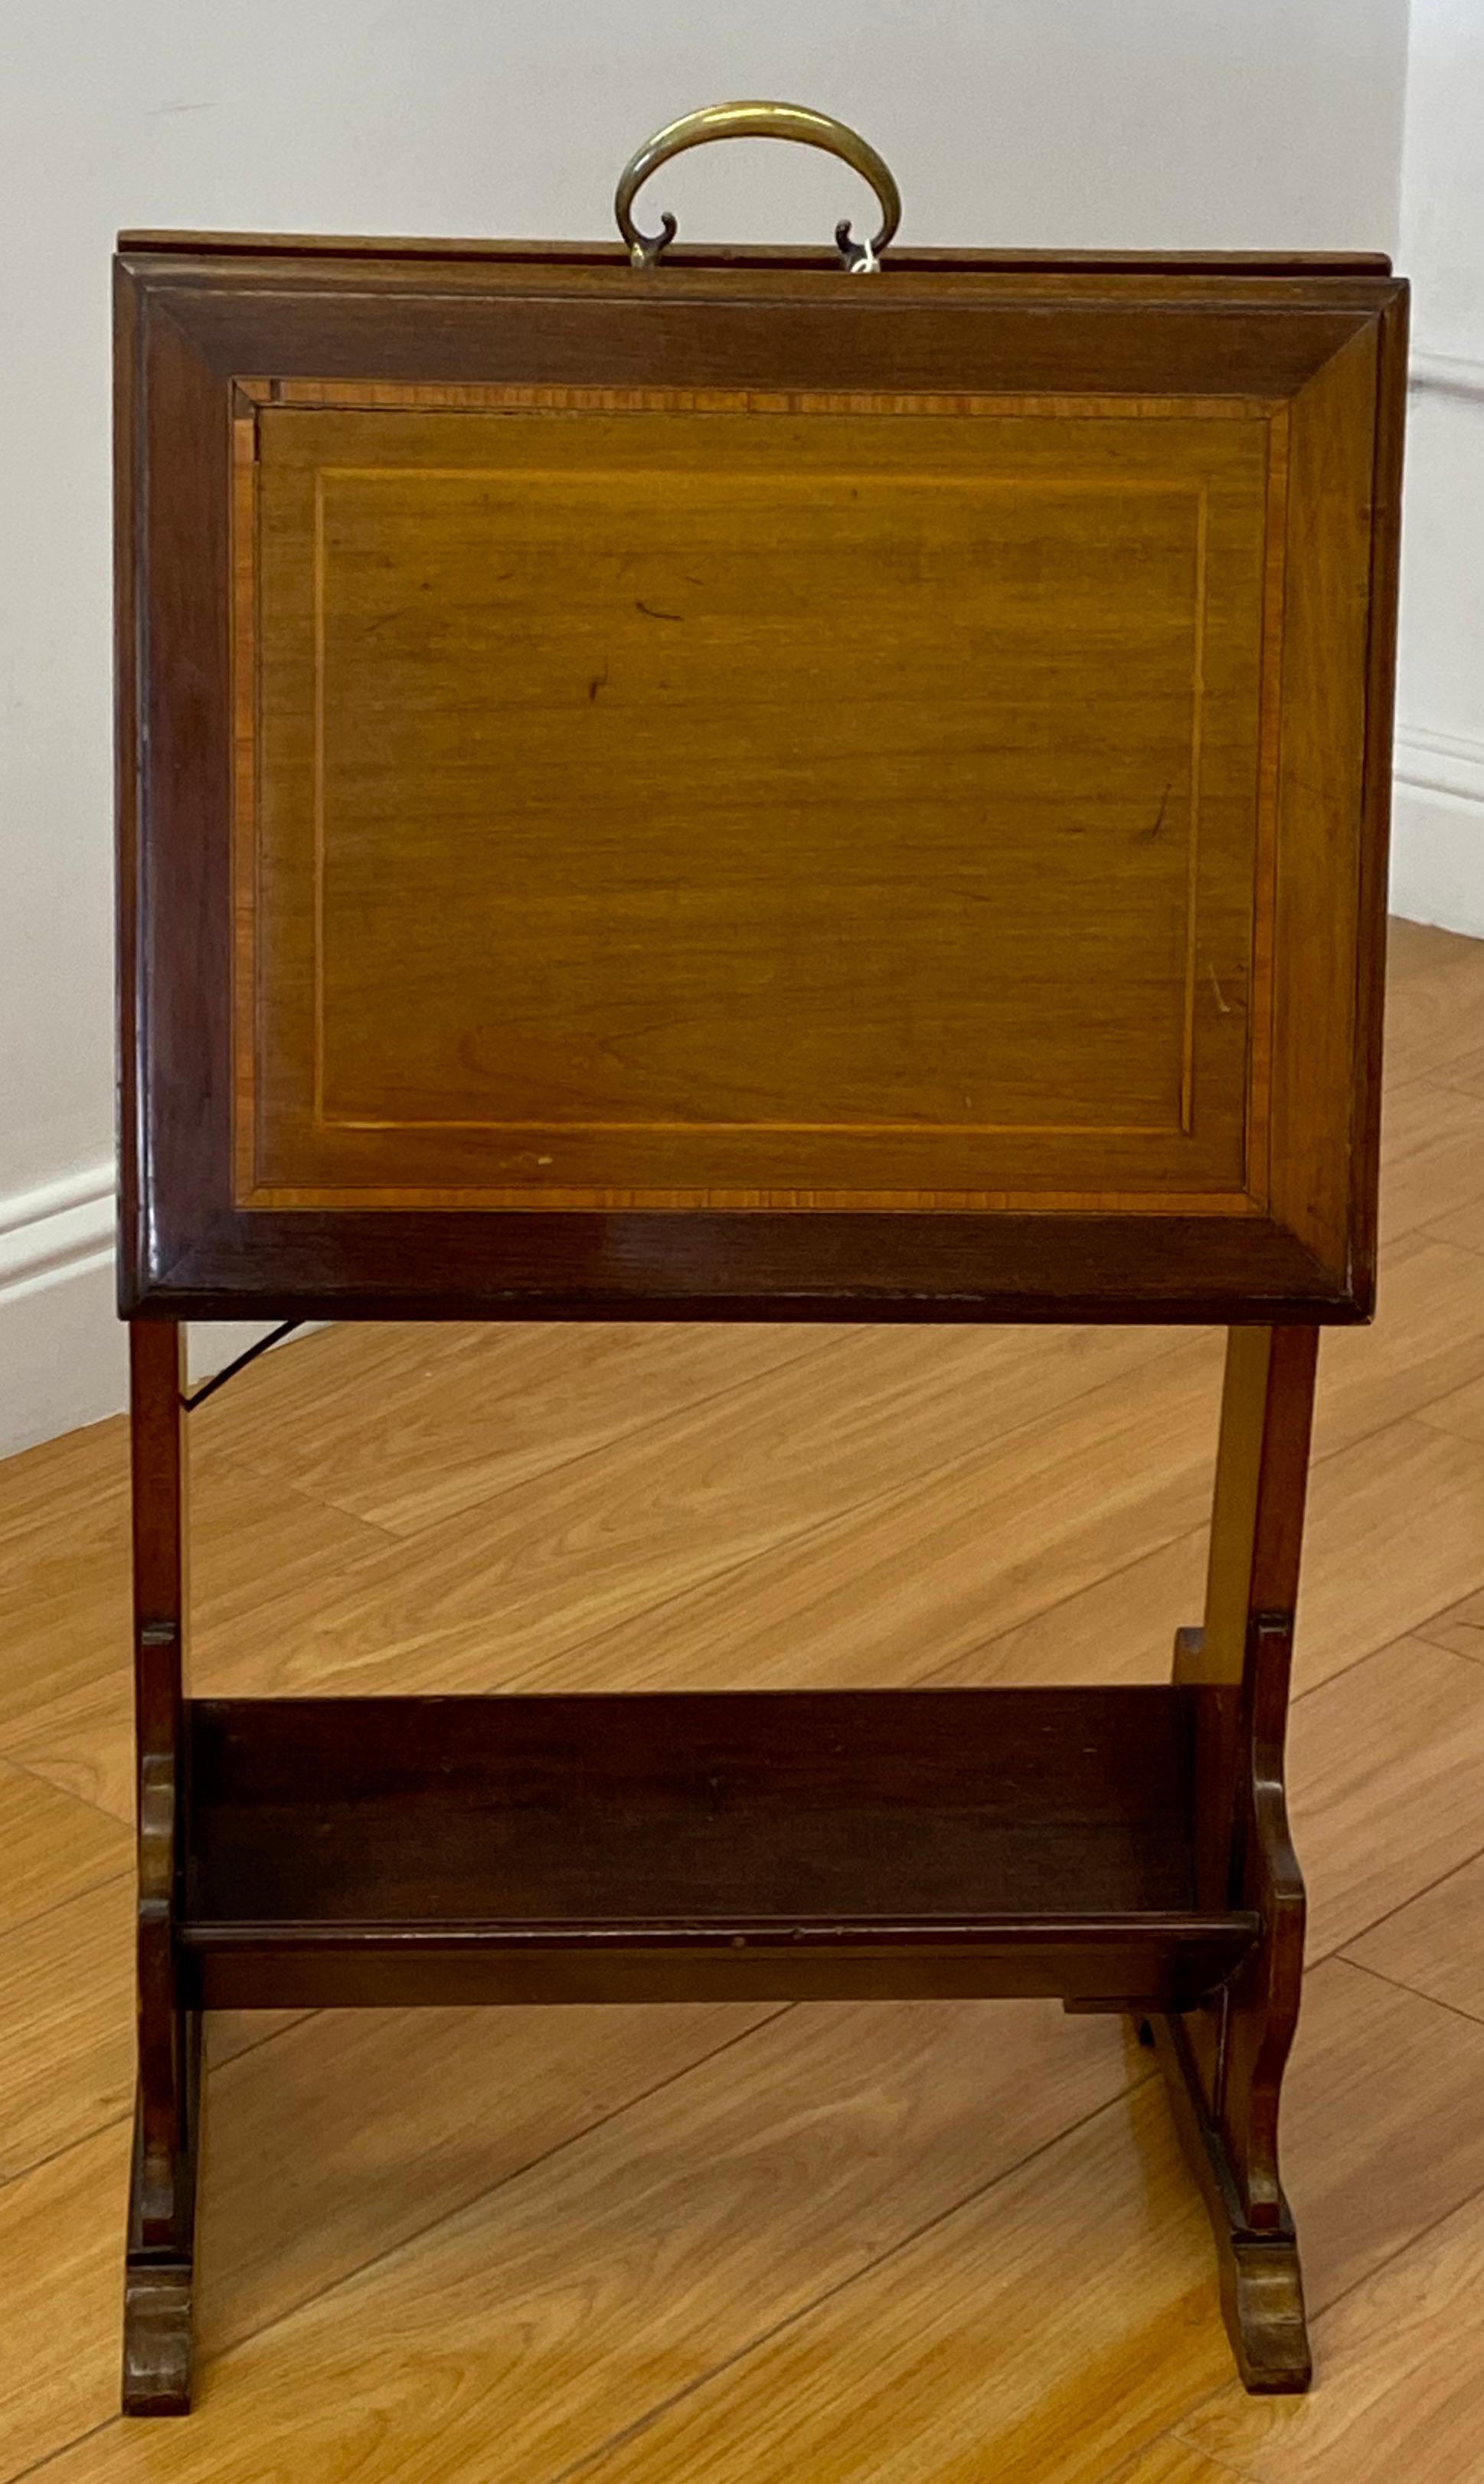 Inlaid mahogany folding art stand, c. 1910. 

This wonderful artist portfolio stand can be used as a magazine rack, or as the art stand it was intended for. 

Unique and wonderful early 20th century piece of furniture. 

Lovely maple inlay.